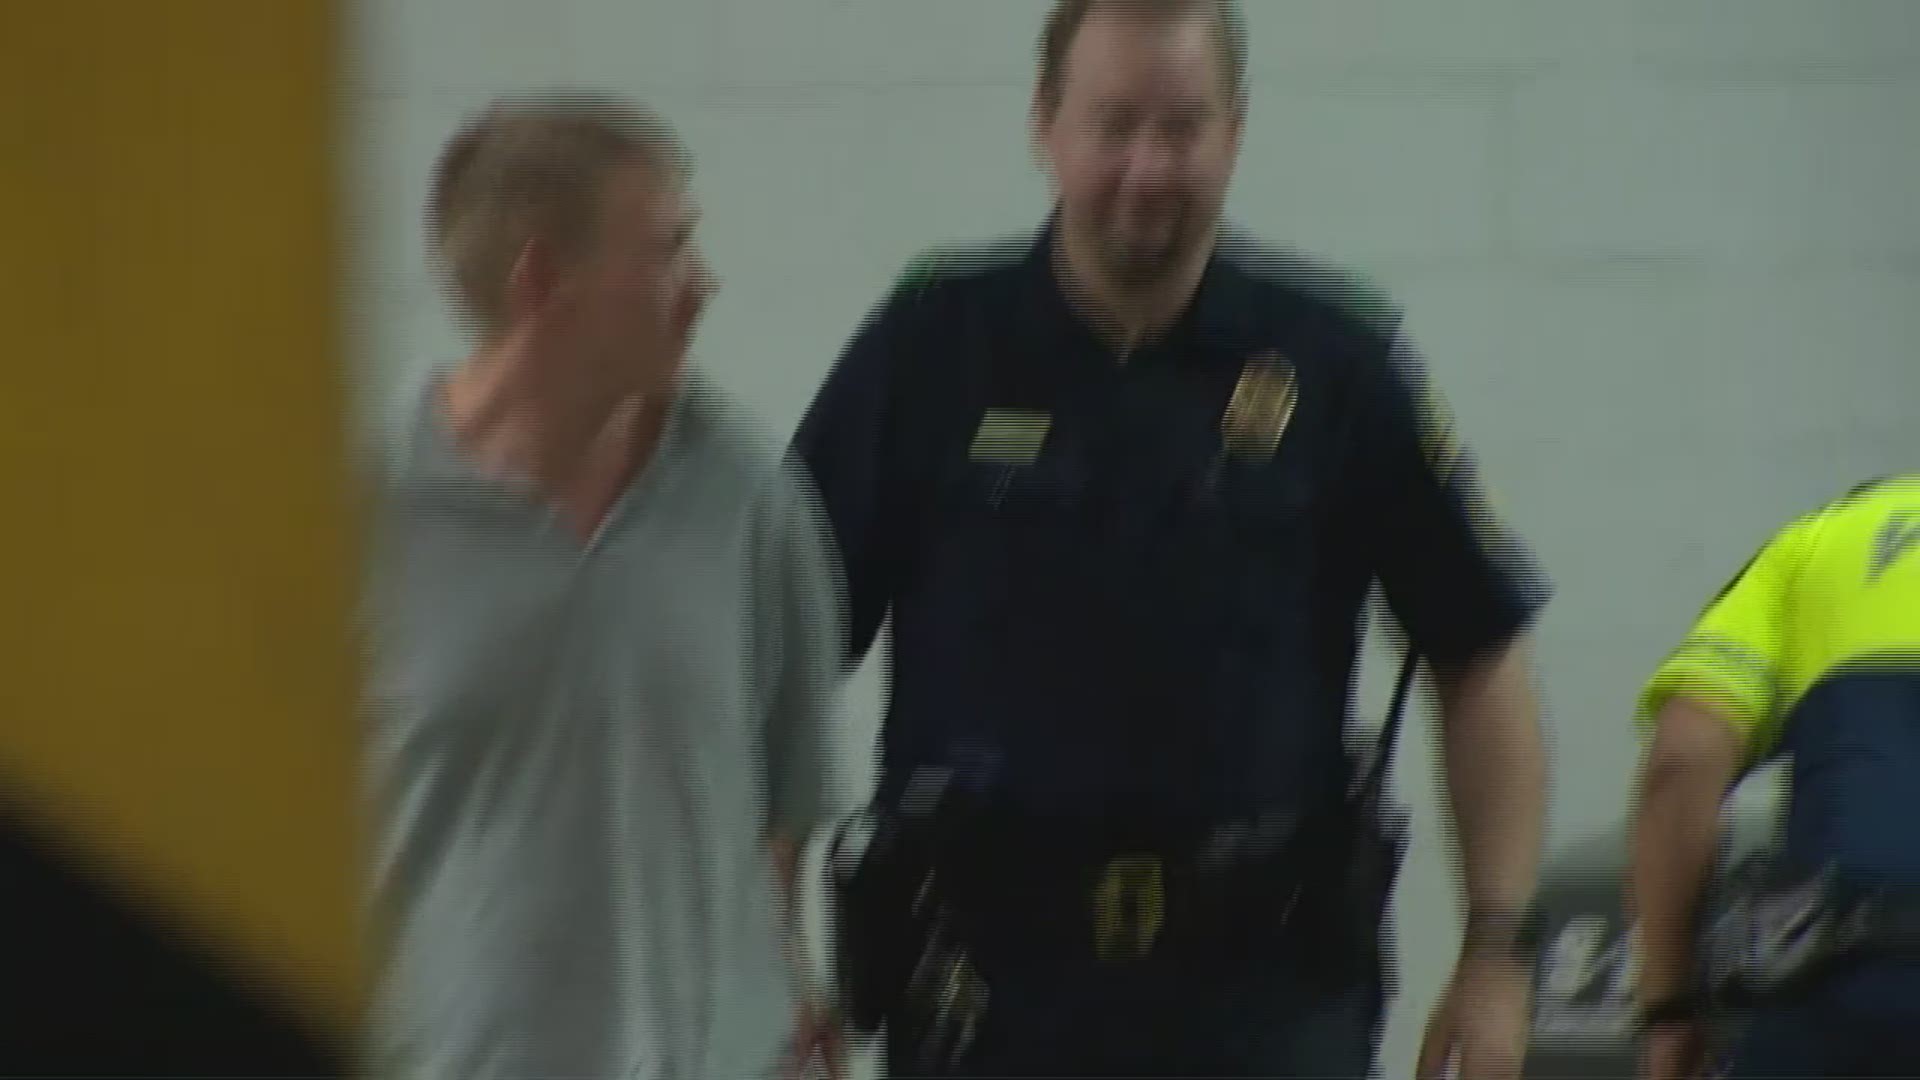 Michael Chadwick Fry's plea to cameras while being walked into the Dallas County Jail. WFAA.com